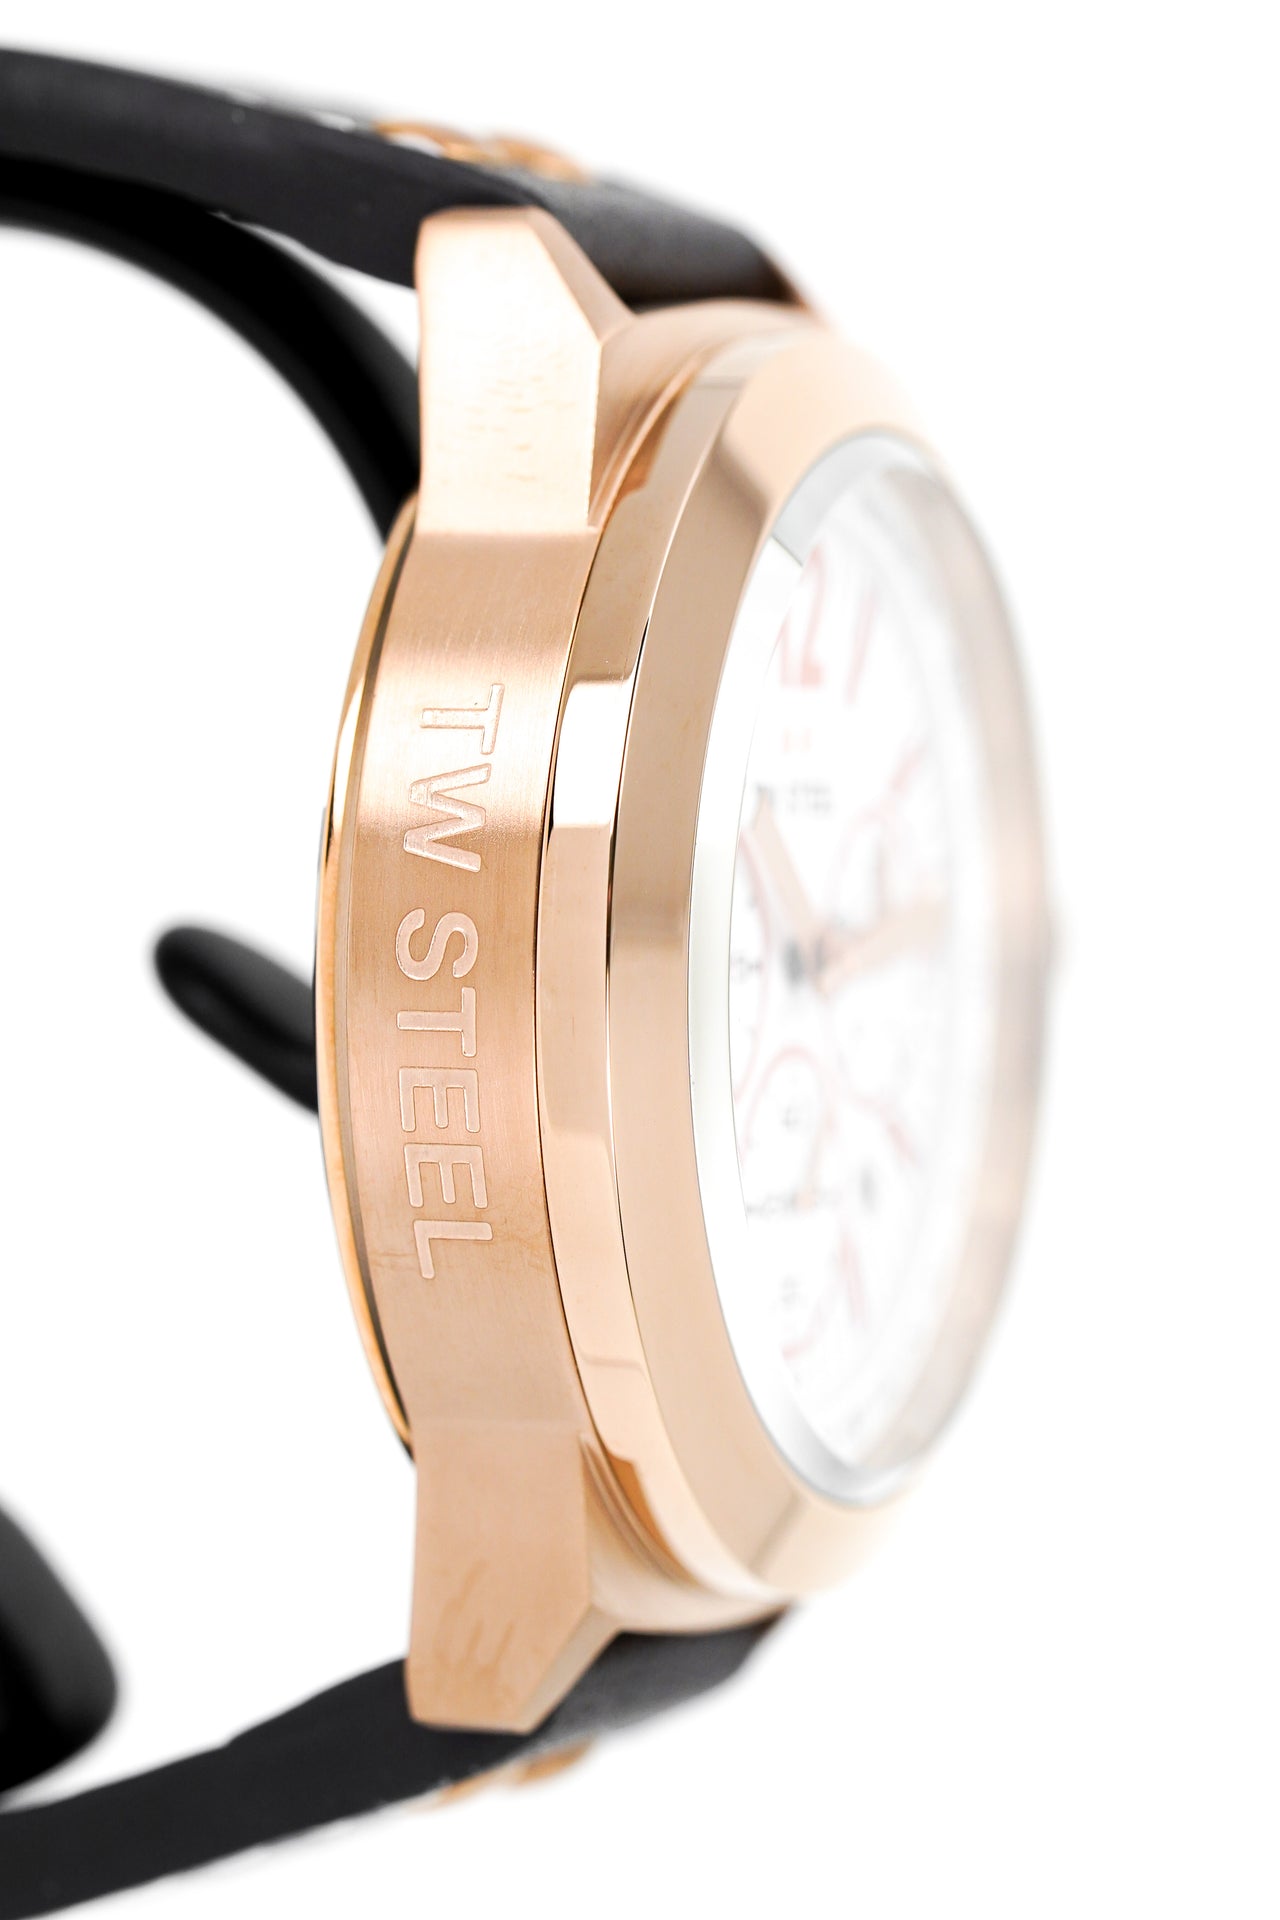 TW Steel Watch Canteen Chronograph Rose Gold CE1019